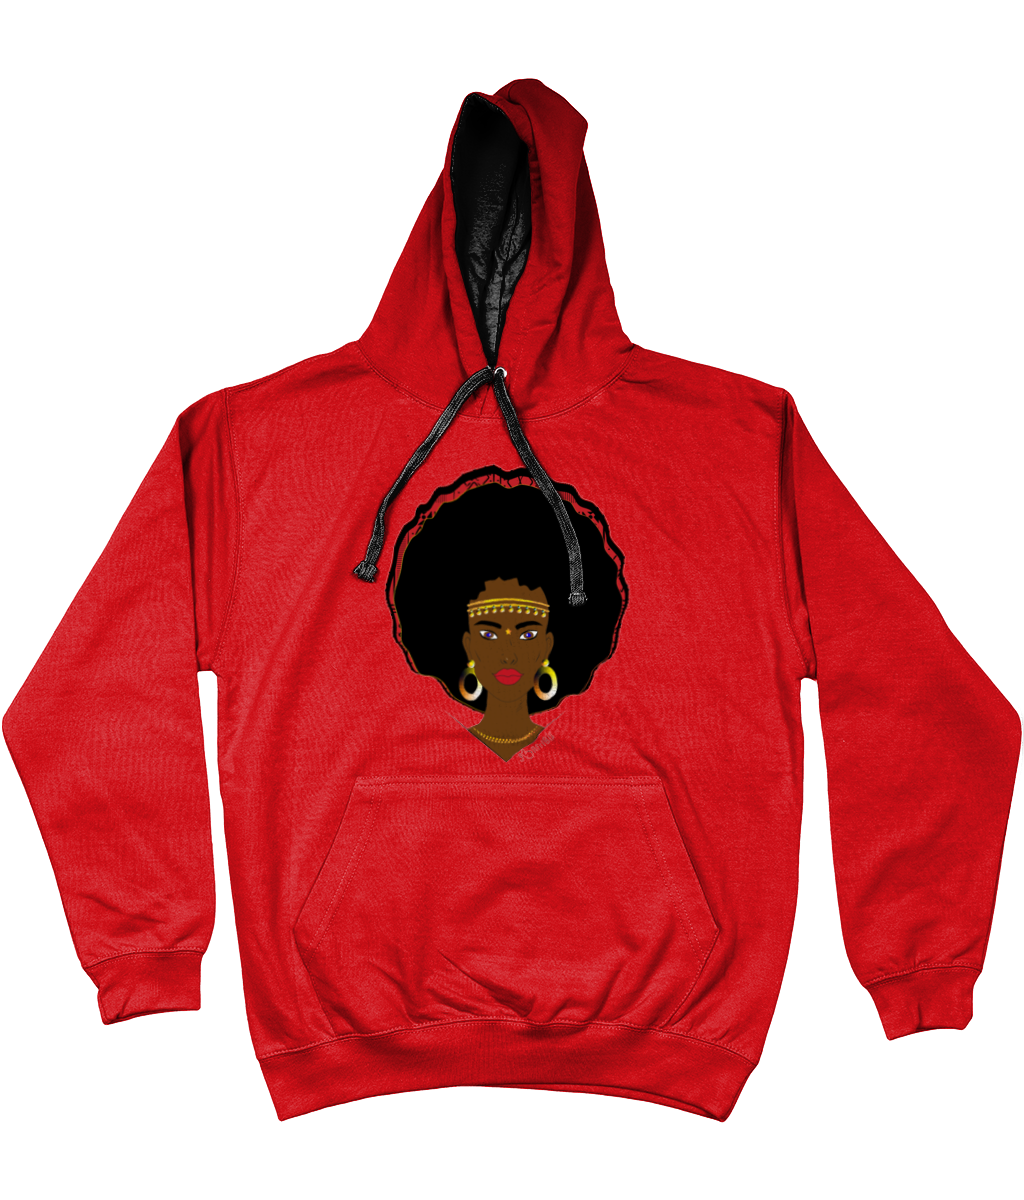 flyersetcinc Warrior Unisex Hoodie with a contrast hood and string